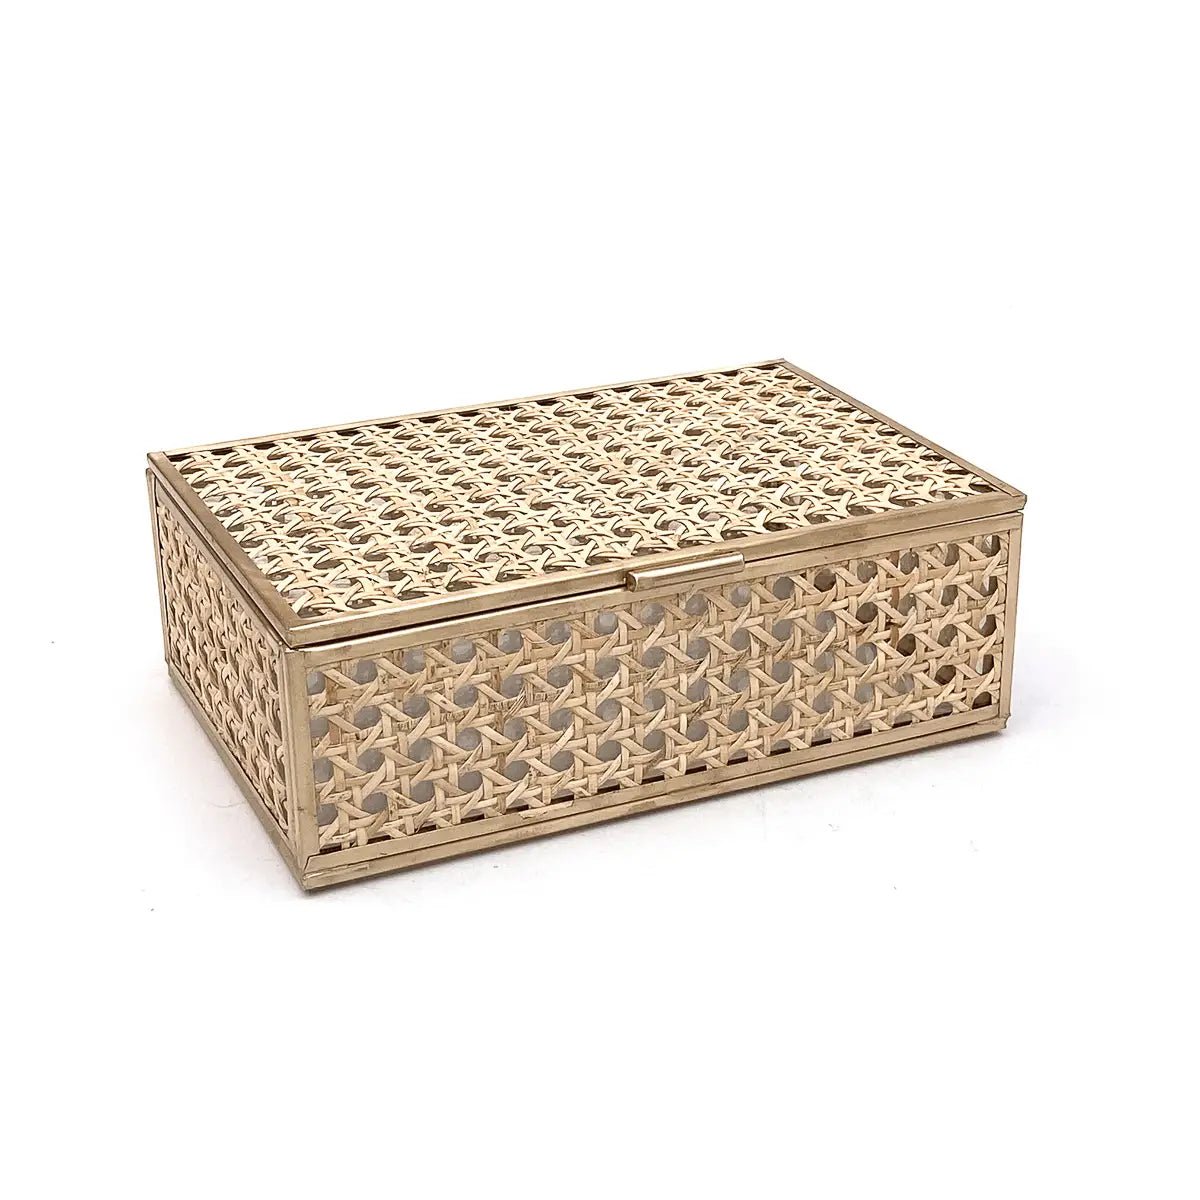 Natural Cane Wicker Jewelry Decor Box - Mindful Living Home